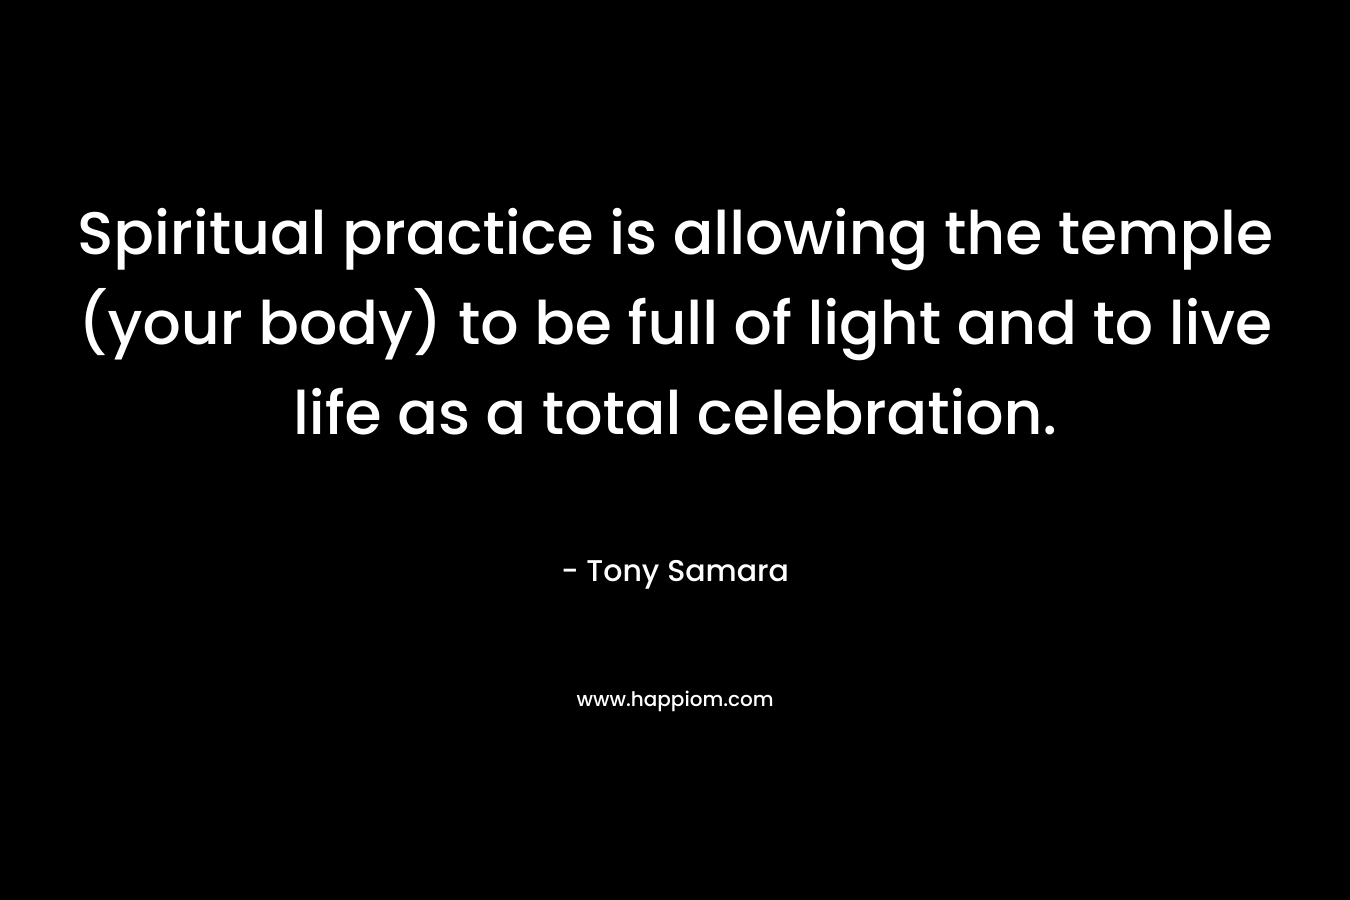 Spiritual practice is allowing the temple (your body) to be full of light and to live life as a total celebration.